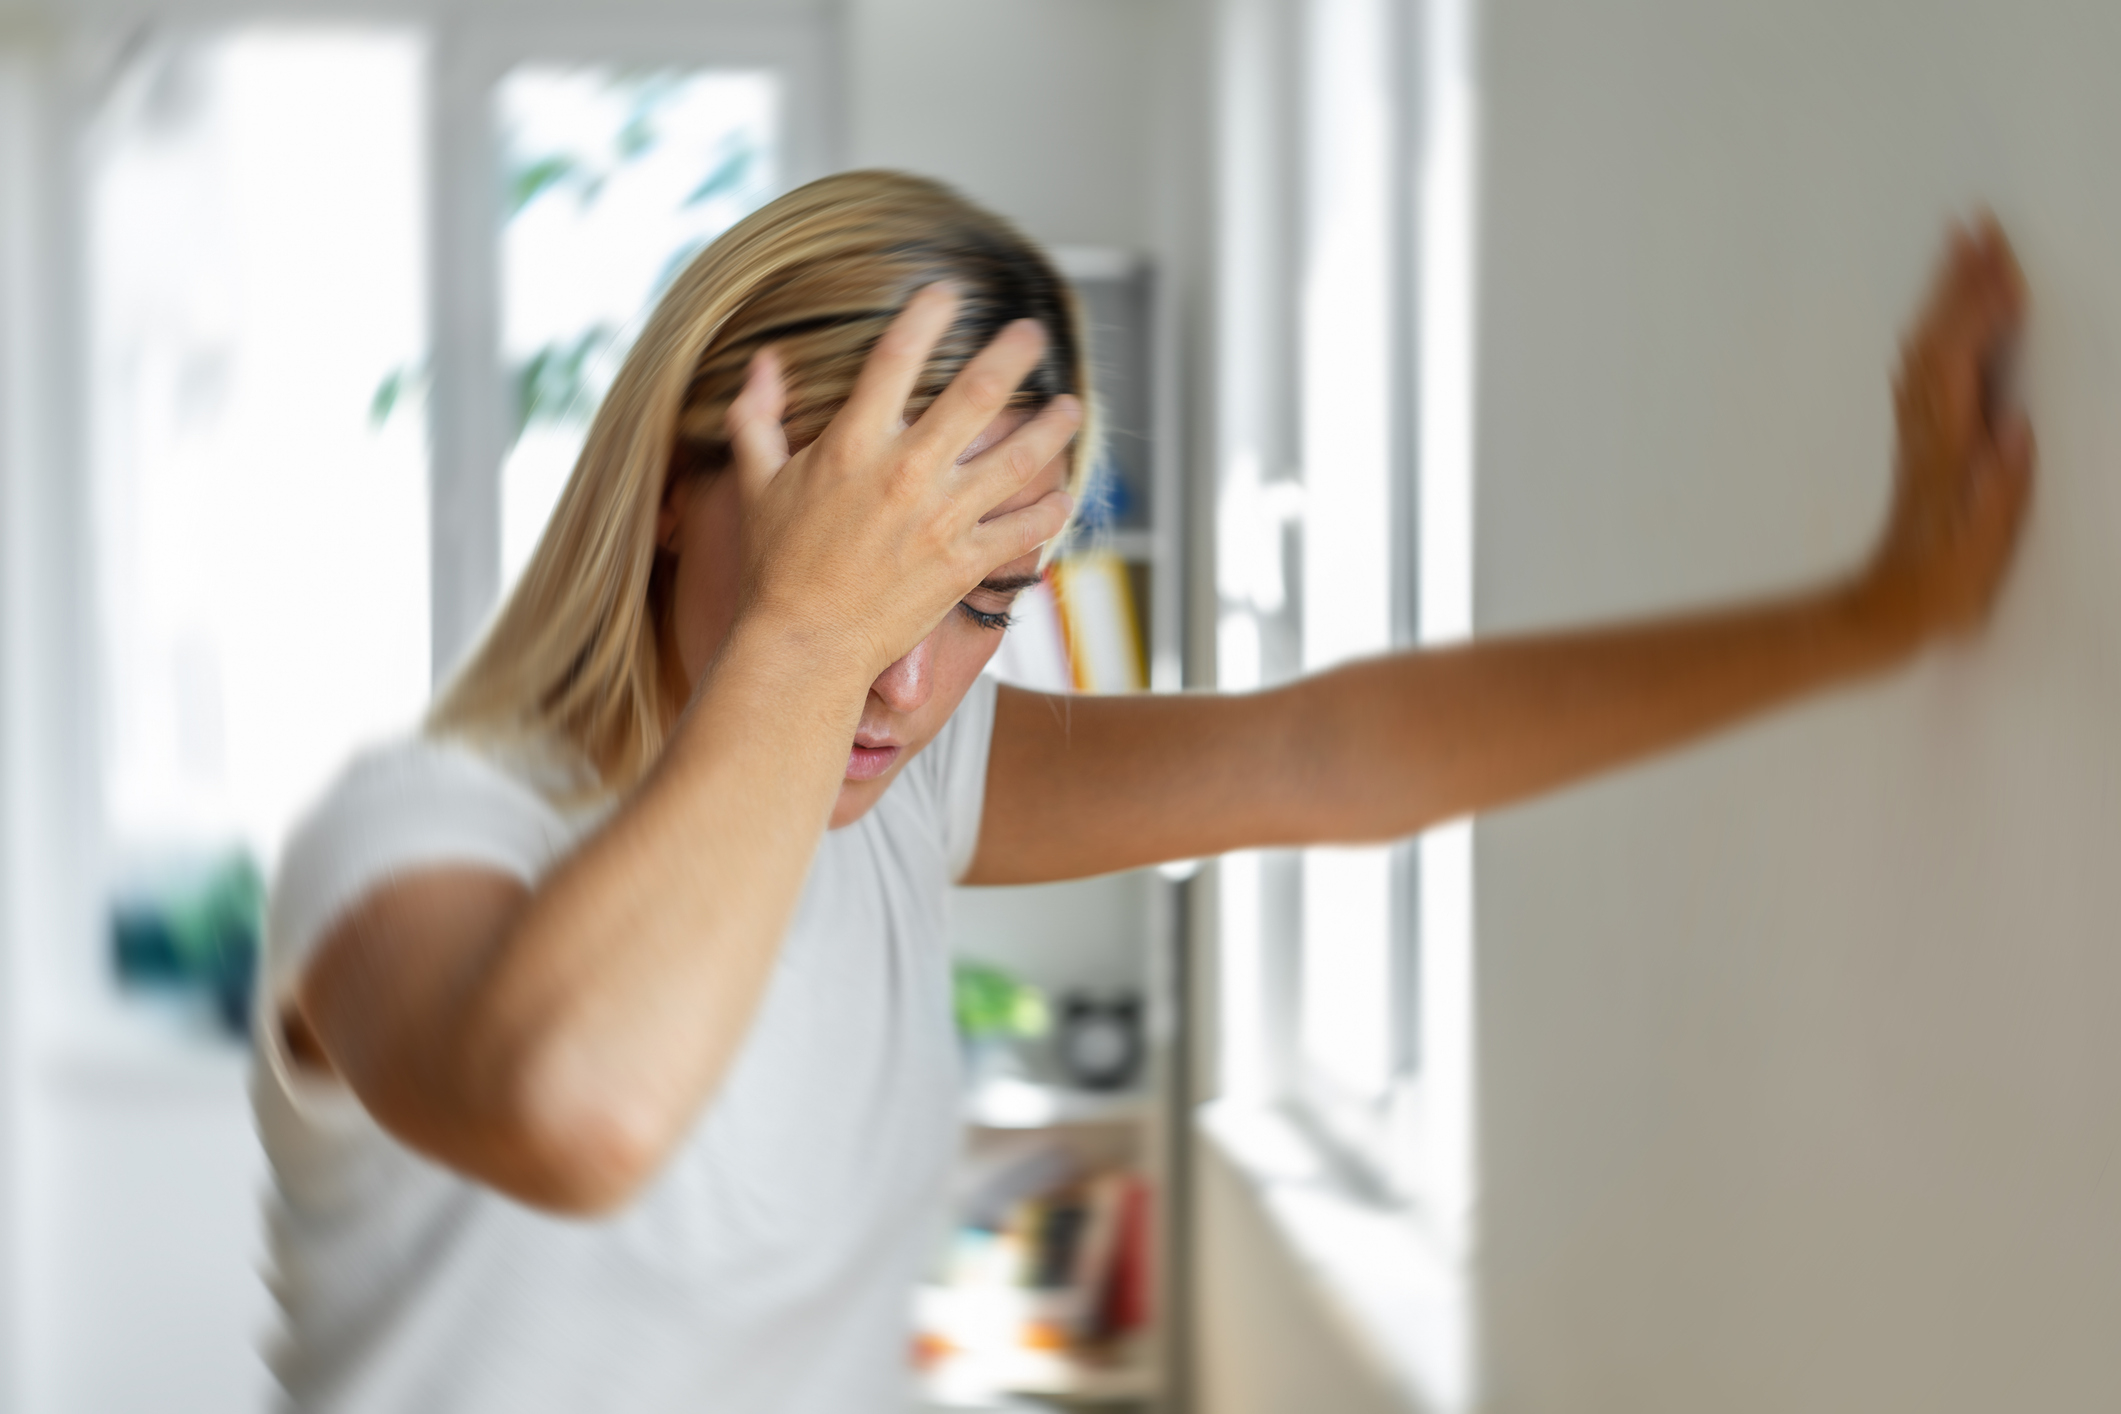 Person feeling dizzy with hand on forehead and one hand on wall for support